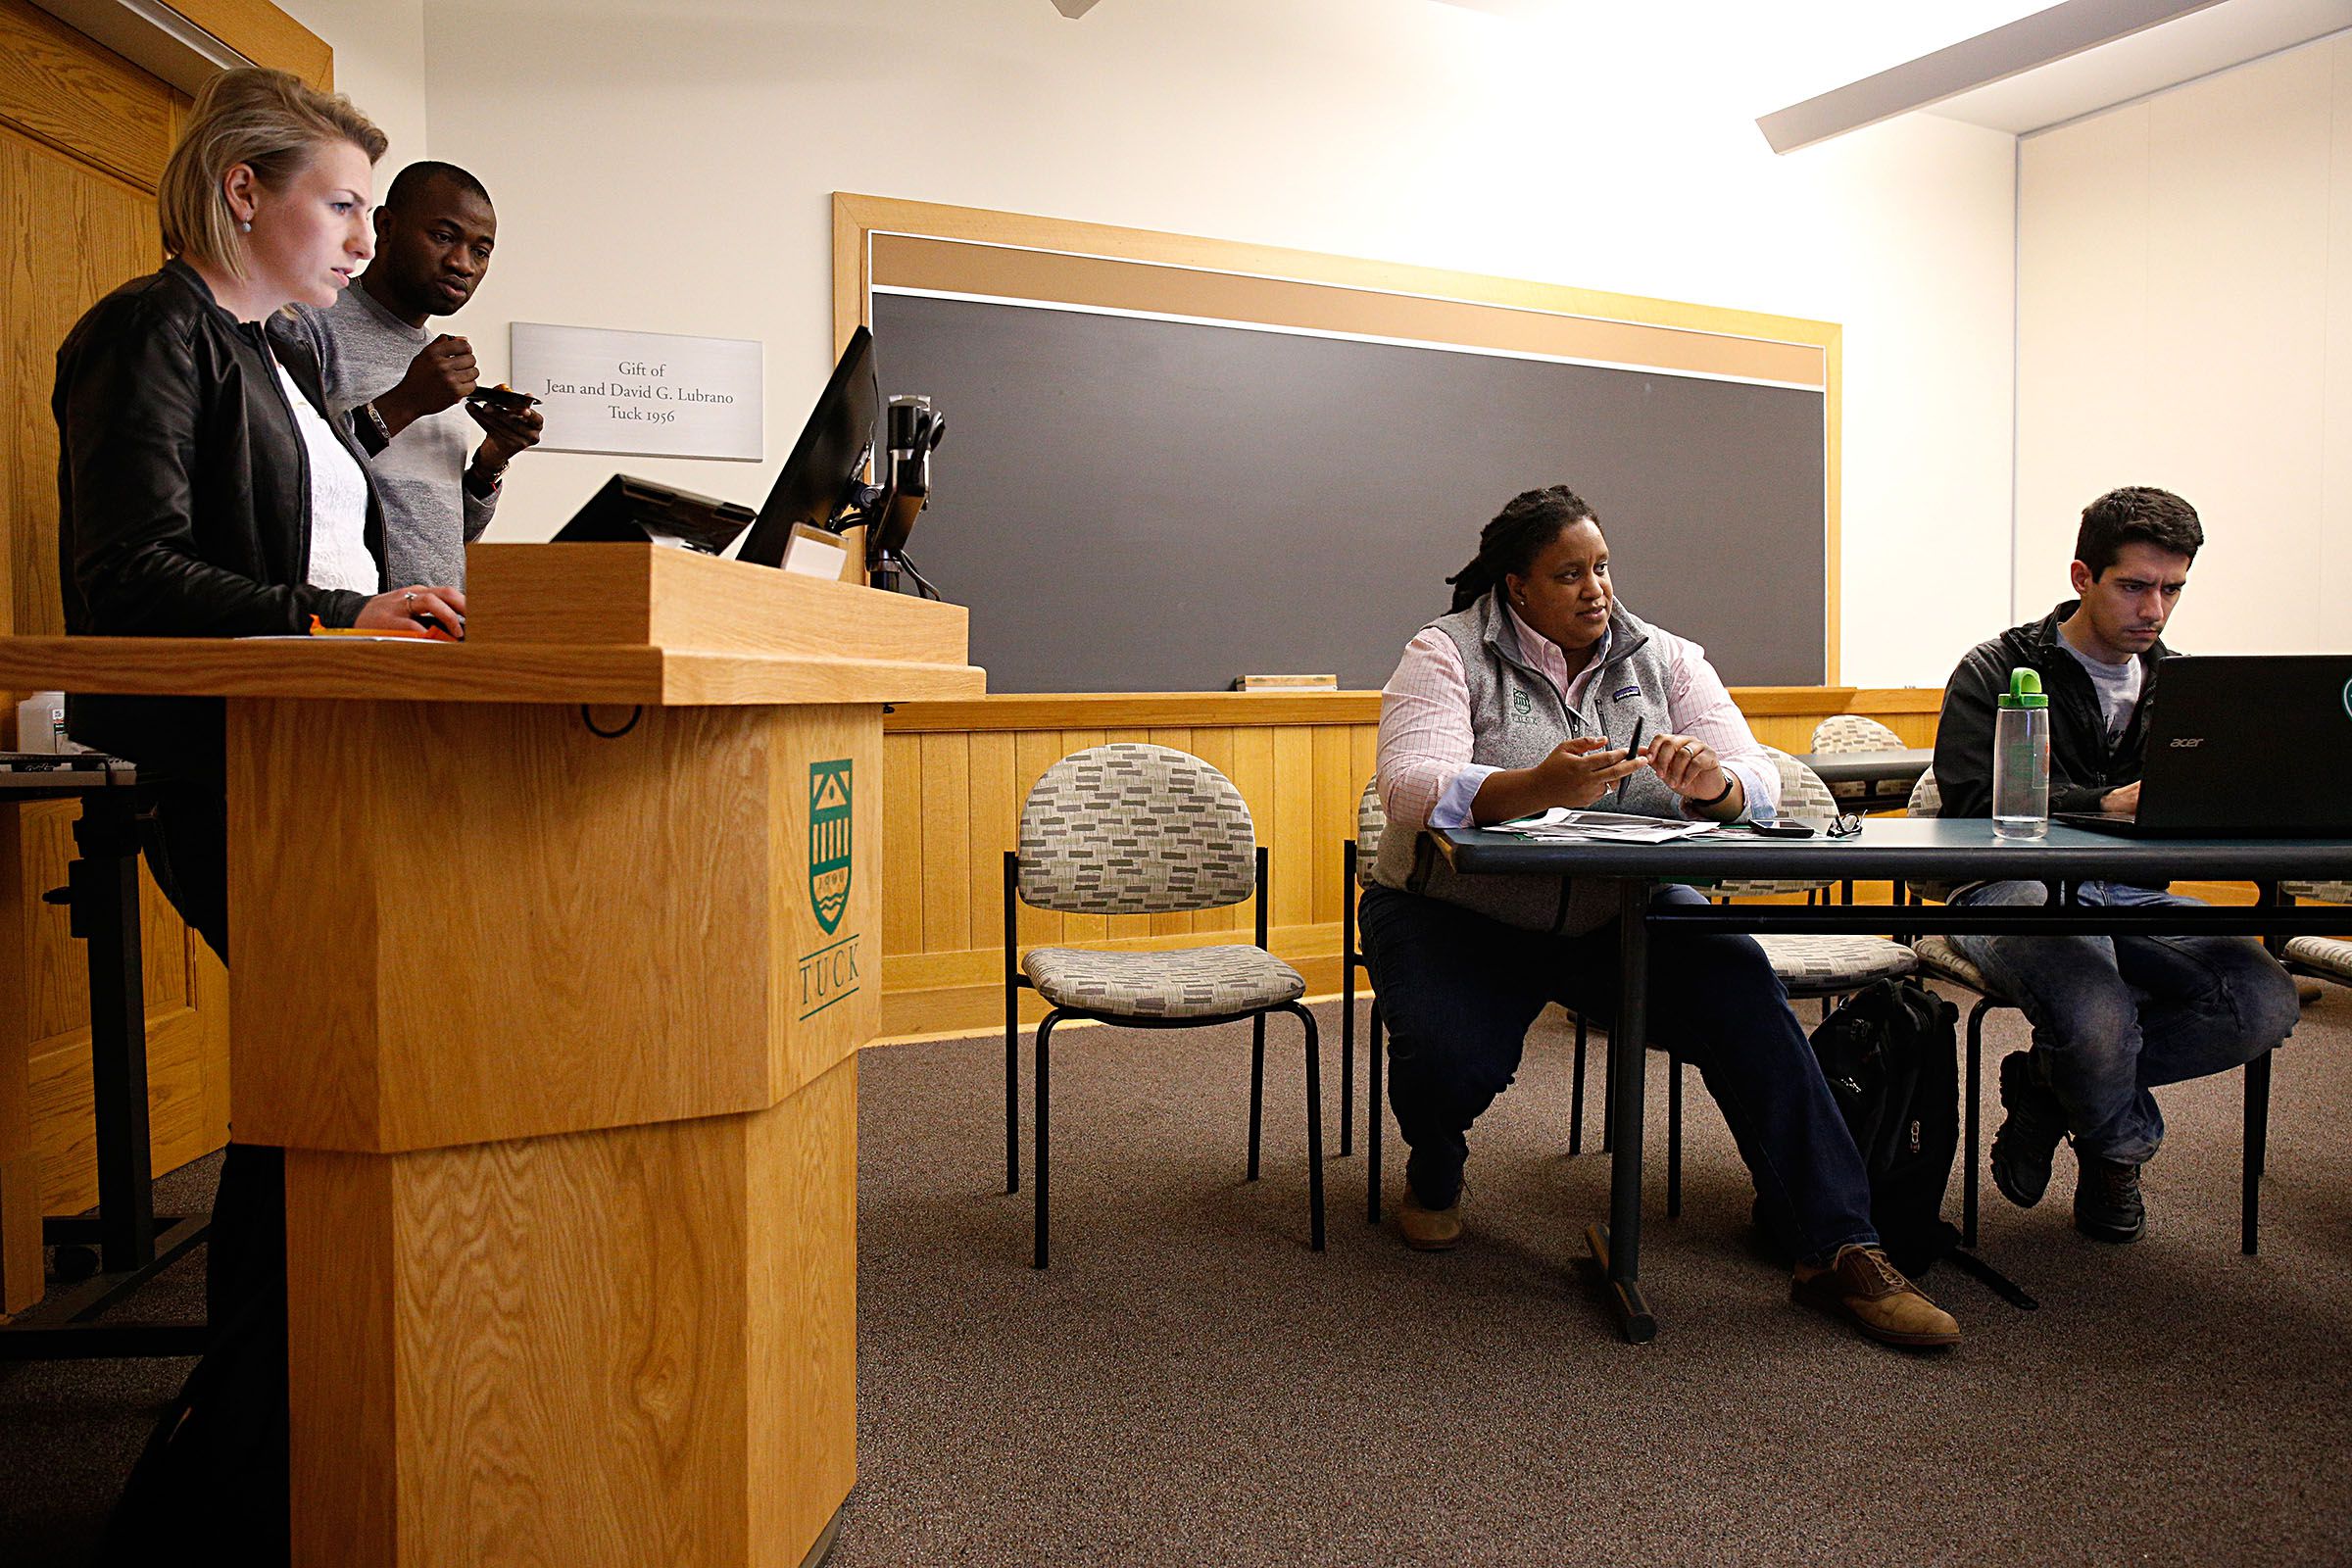 Dia Draper, director of strategic initiatives at the Tuck School of Business, answers questions from second-year students, including from left, Martina Ravelli, Martial Combari and Enrique Curiel, in Hanover, N.H., on Oct. 24, 2017, about their plans for the annual Tuck Diversity Conference held at the school in November. Seven students are co-chairs of the conference, held since 1994 for prospective students. (Valley News - Geoff Hansen) Copyright Valley News. May not be reprinted or used online without permission. Send requests to permission@vnews.com.